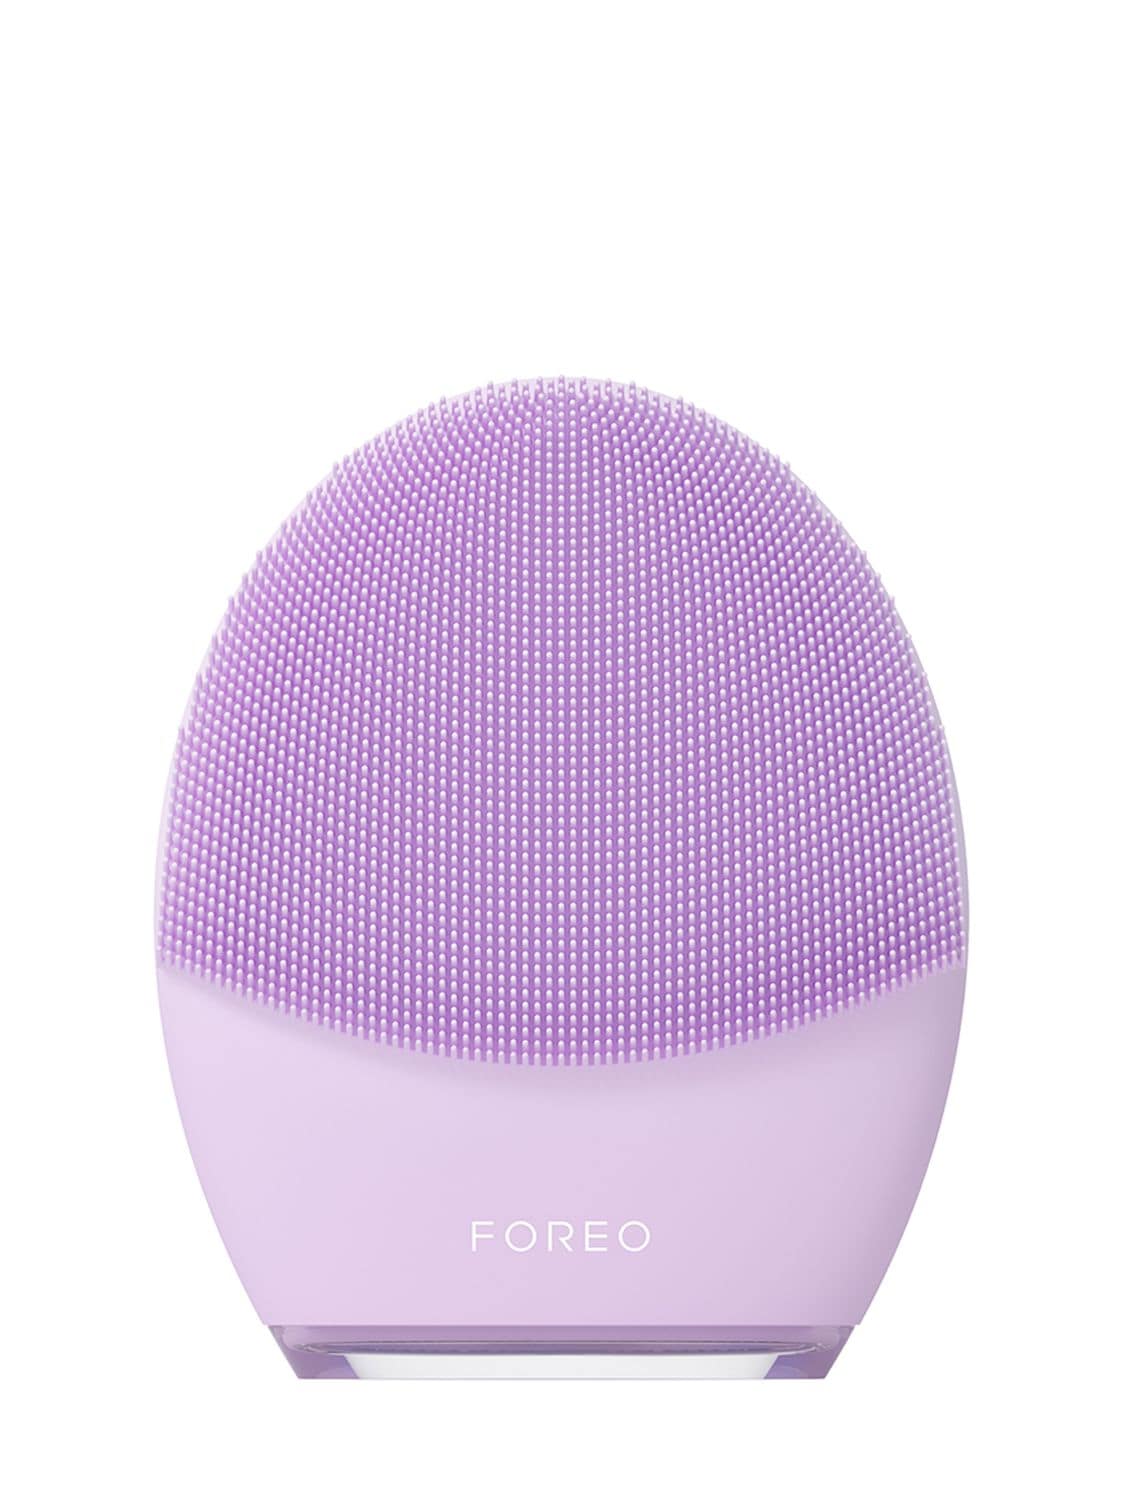 Image of Luna 4 Face Cleansing Device